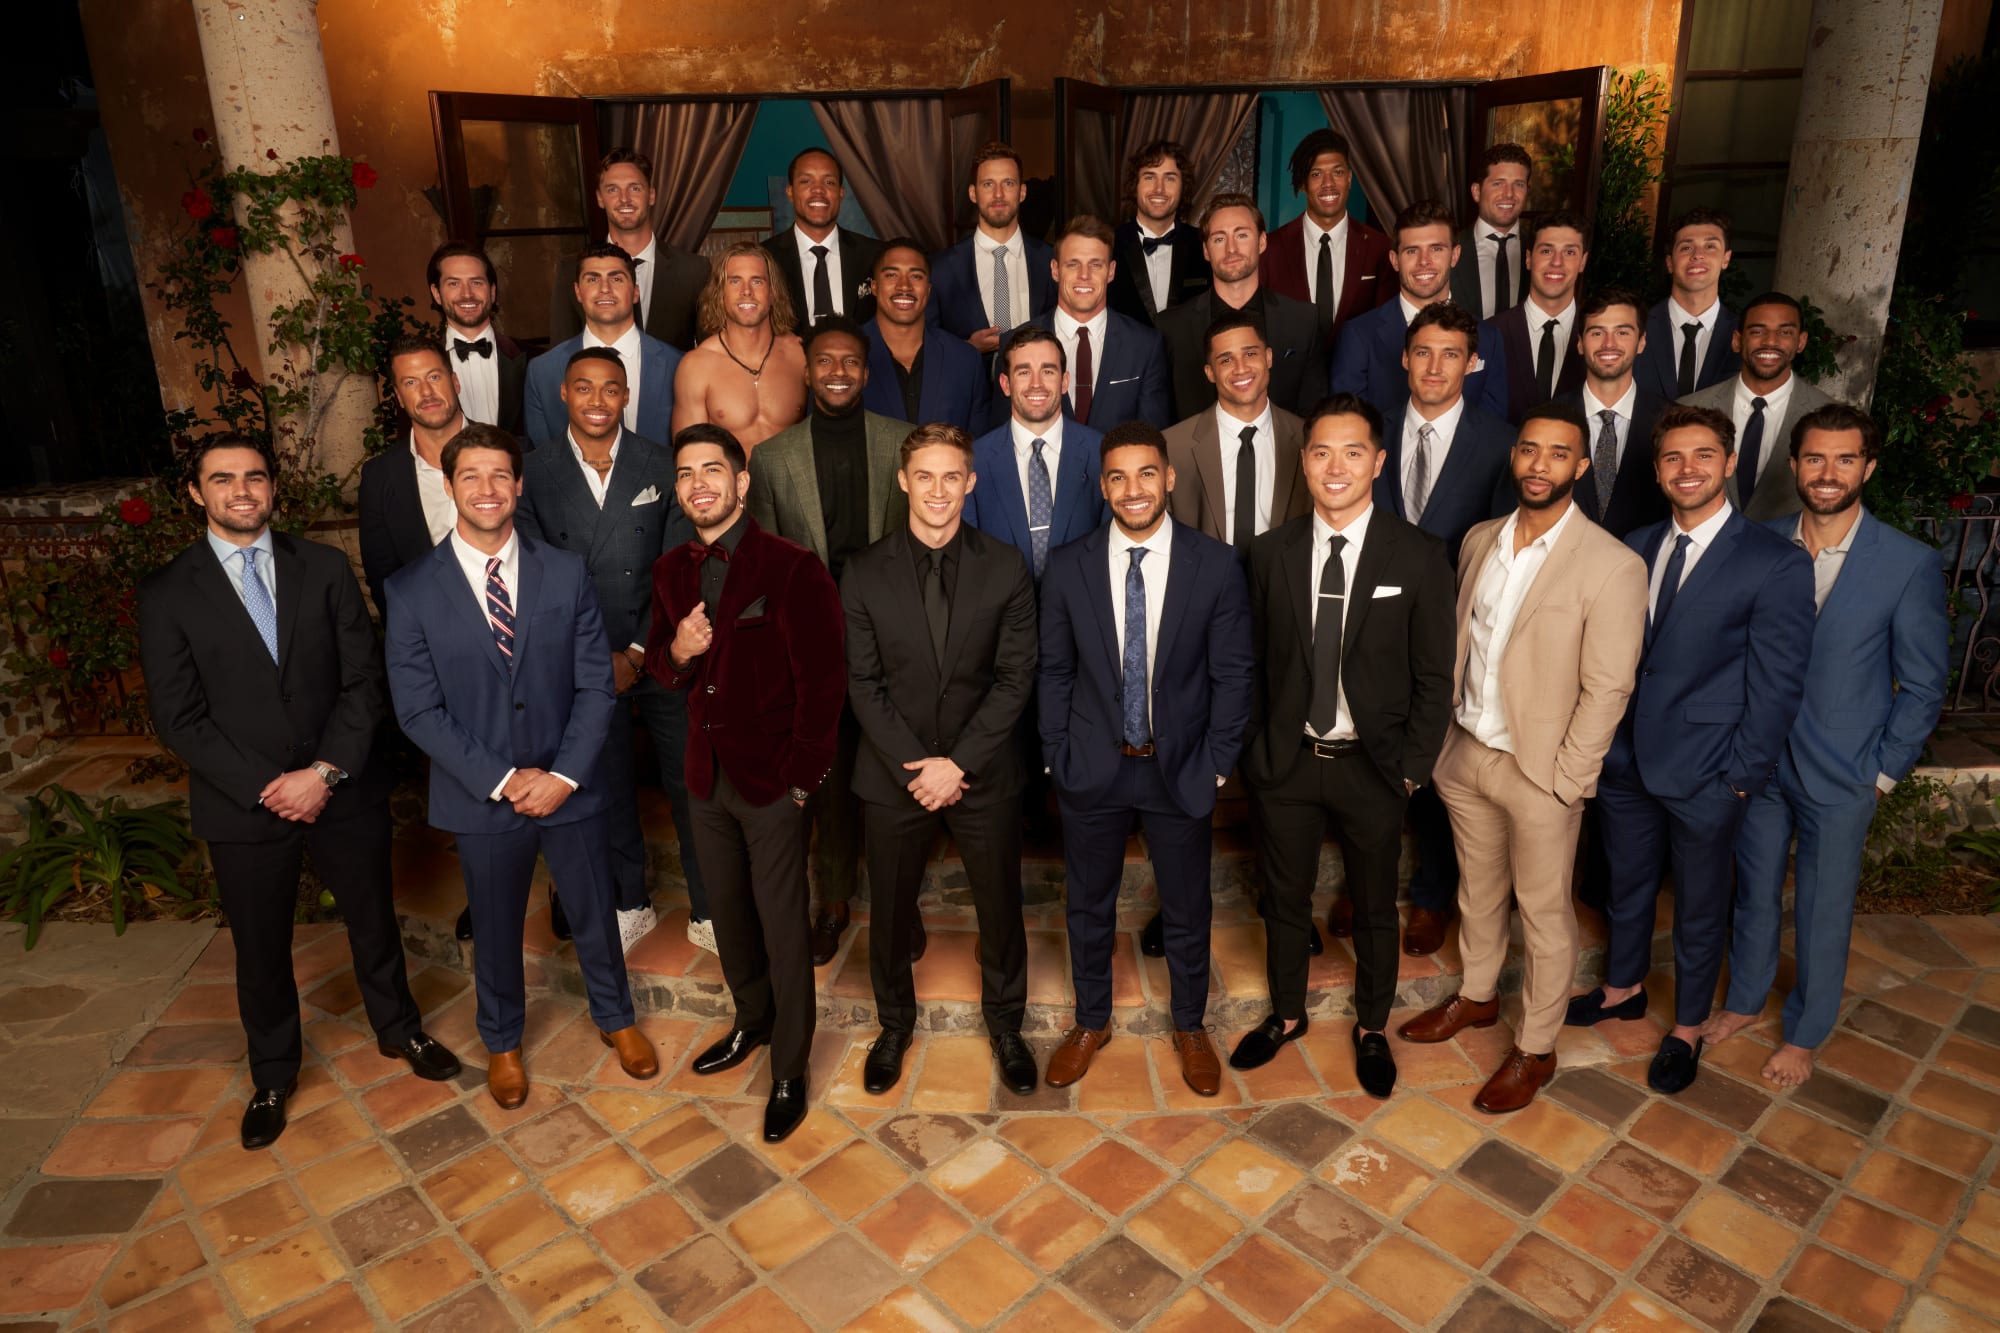 The Bachelor 2023 Who will be the next Bachelor? (Reality Steve spoilers)